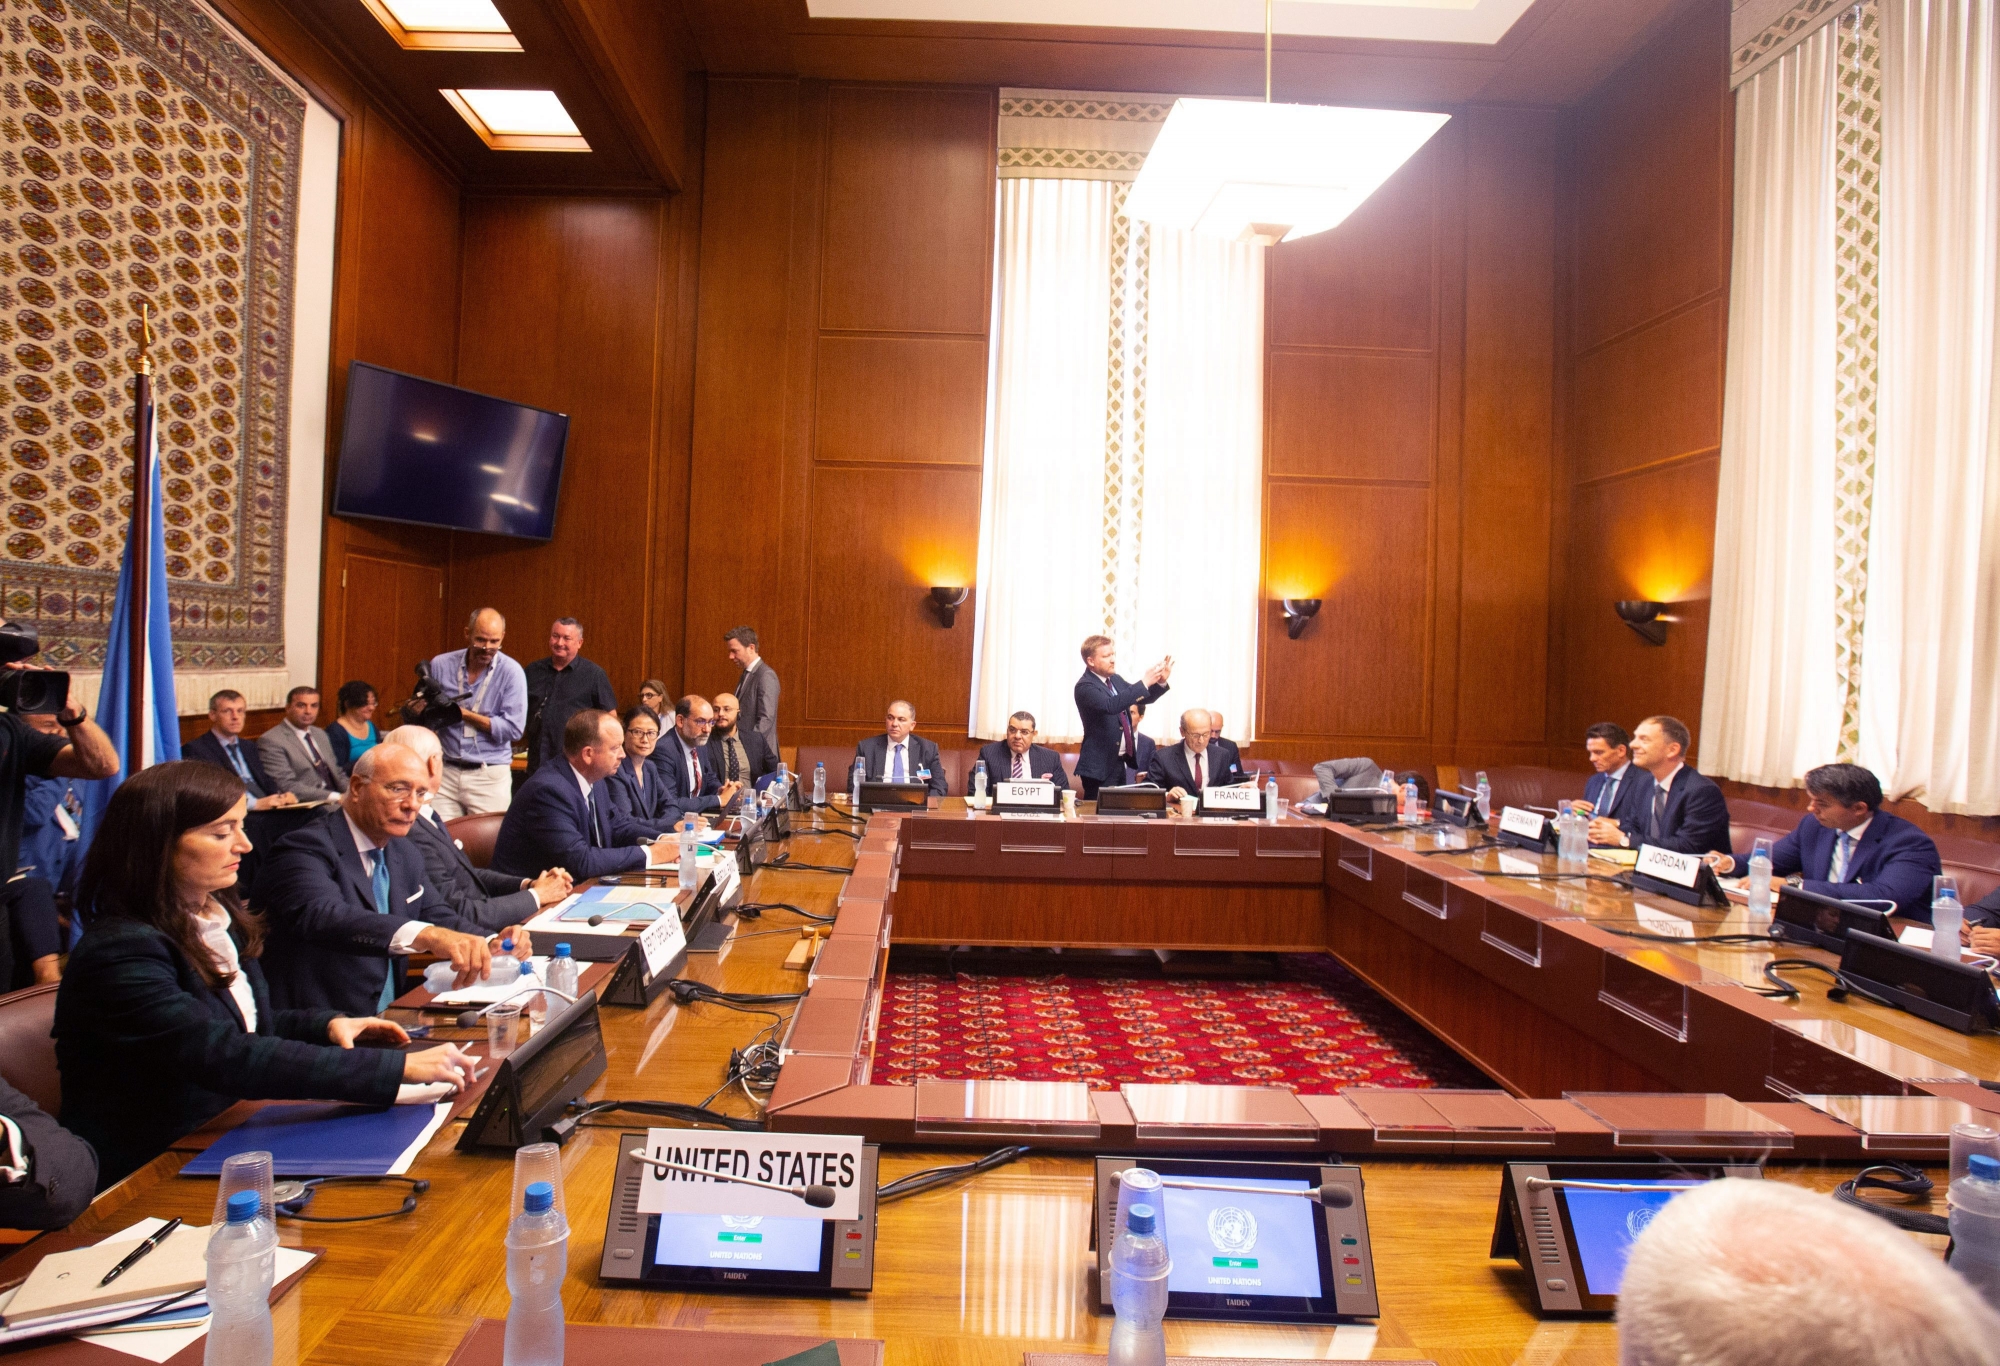 Representatives from Egypt, France, Germany, Jordan, Saudi Arabia, the United Kingdom and the United States attend a meeting, during the consultations on Syria, at the European headquarters of the United Nations in Geneva, Switzerland, on Friday, September 14, 2018. Representatives from Egypt, France, Germany, Jordan, Saudi Arabia, the United Kingdom and the United States meet with the UN Special Envoy of the Secretary-General for Syria for discussions about the situation in Syria. (KEYSTONE/XINHUA/POOL/Xu Jinquan) SWITZERLAND UN SYRIA CONSULTATIONS